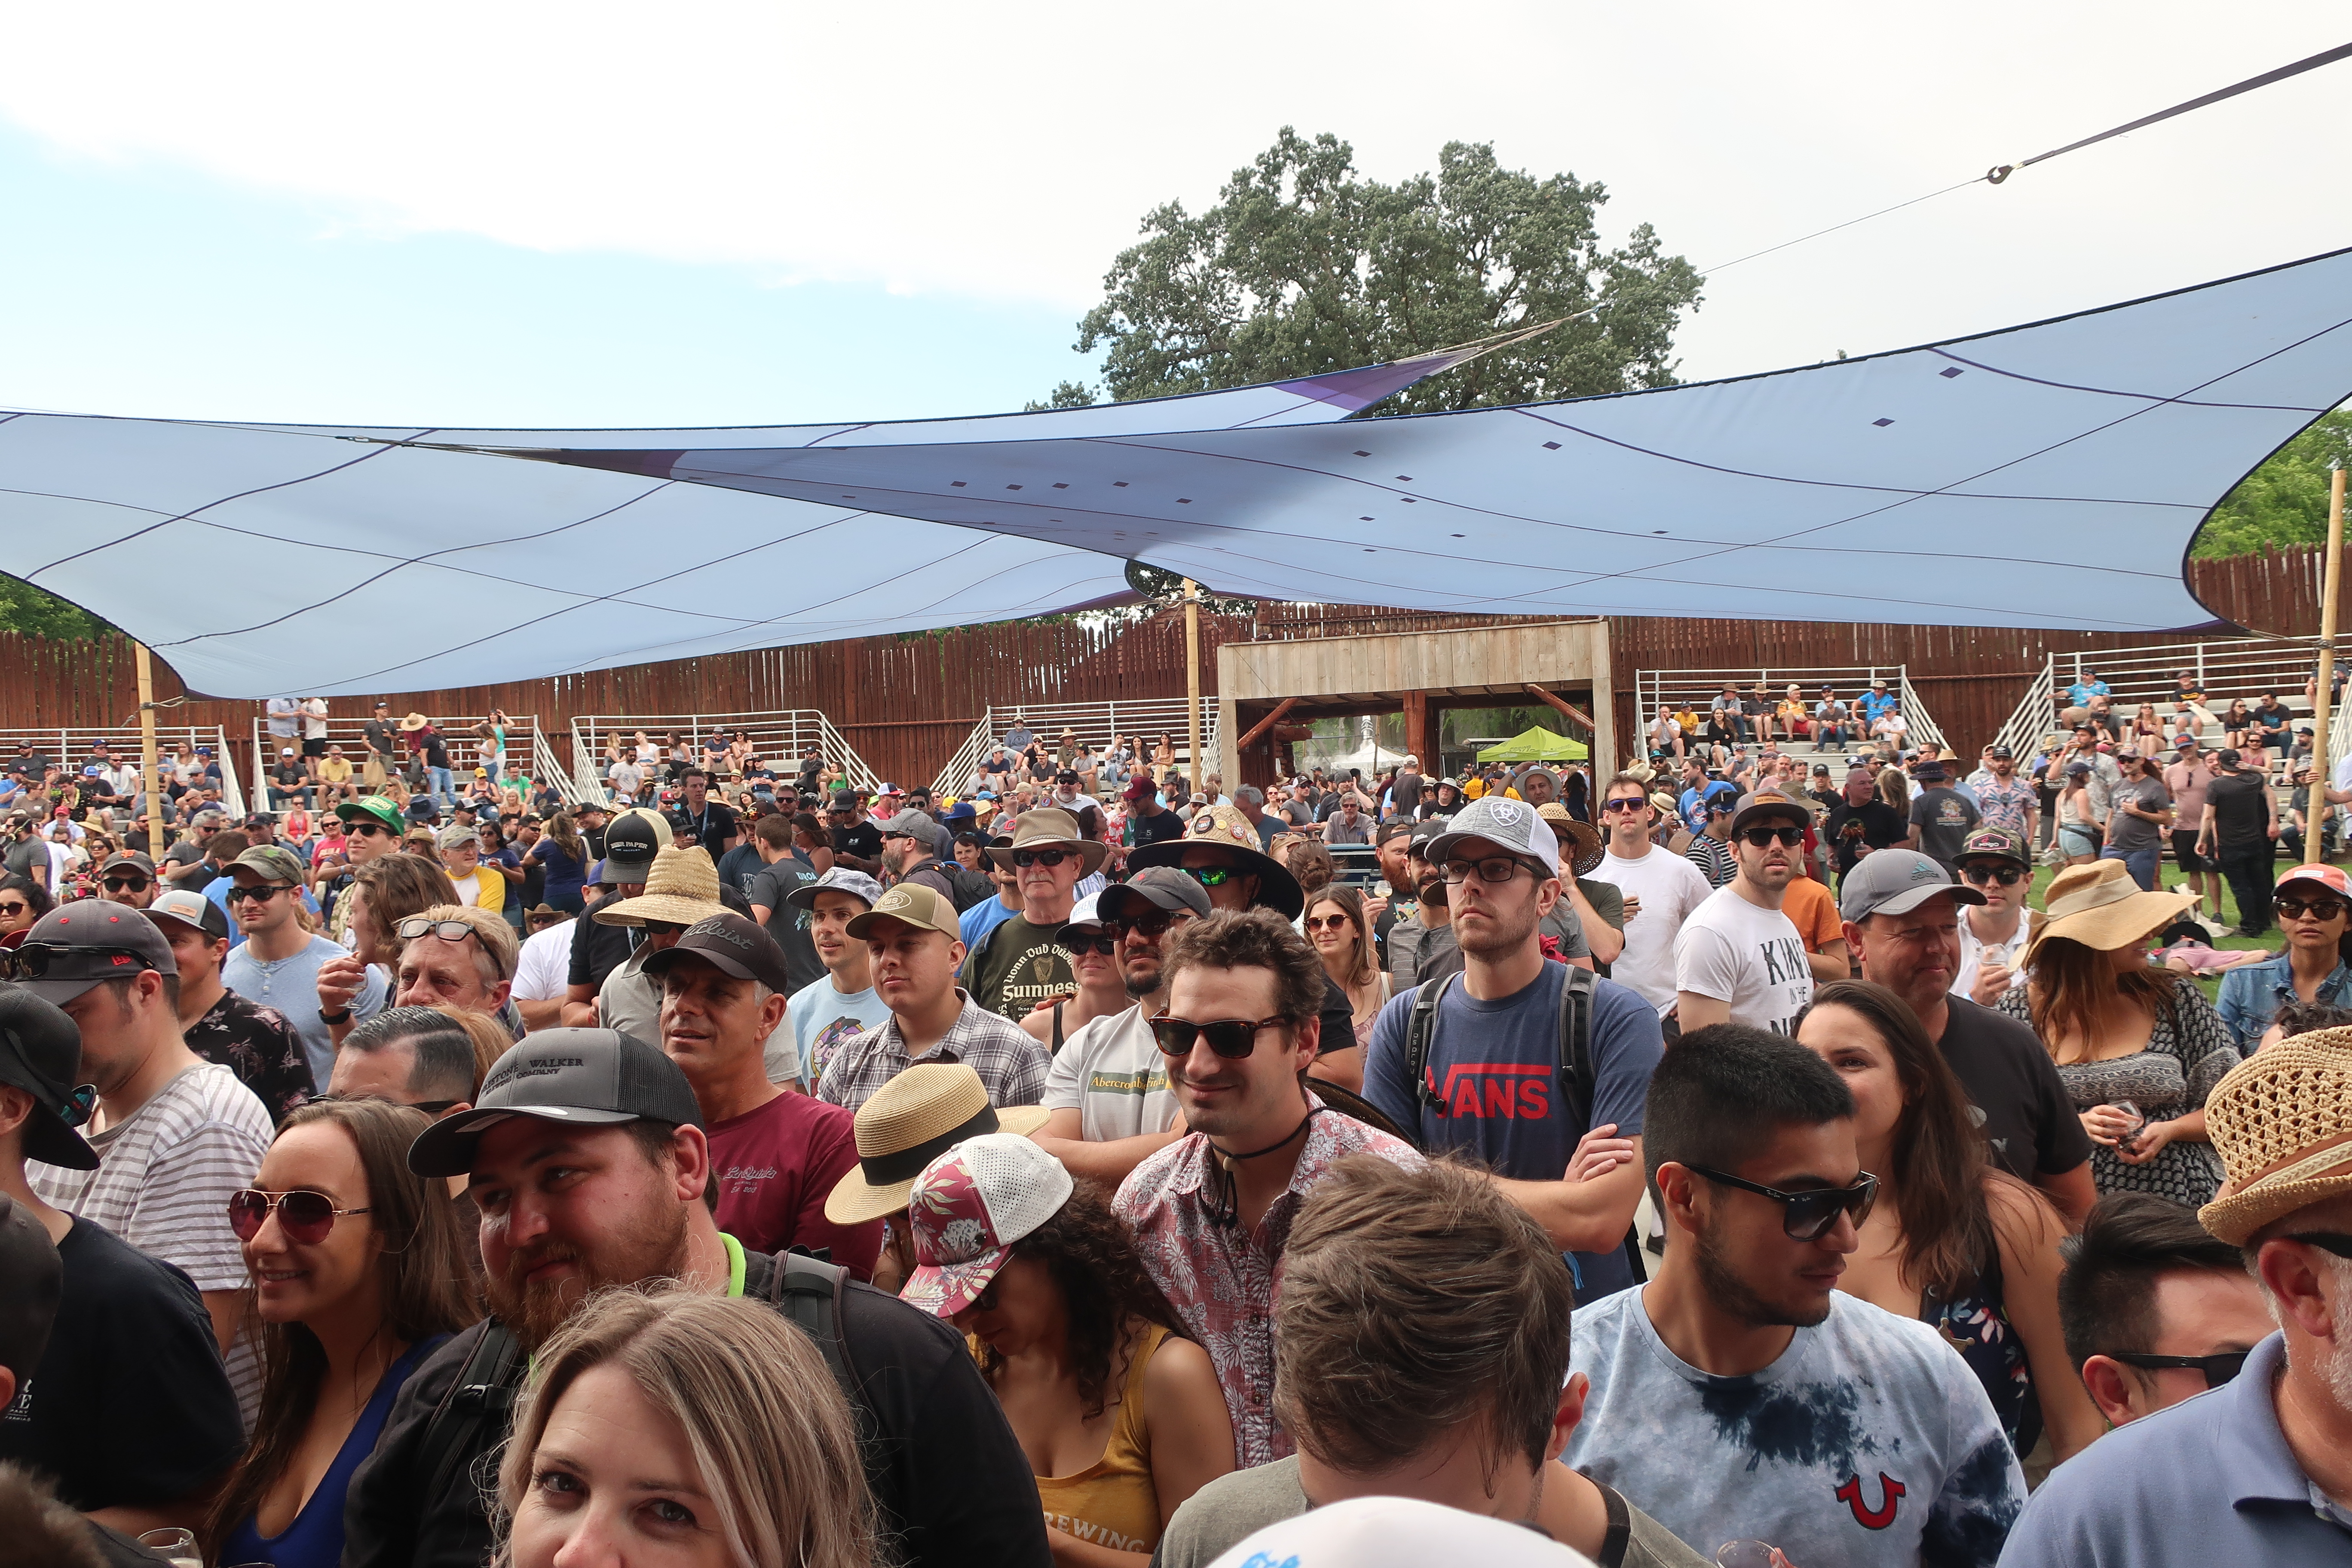 The crowd during the People's Choice Award ceremony at the 2019 Firestone Walker Invitational Beer Fest.